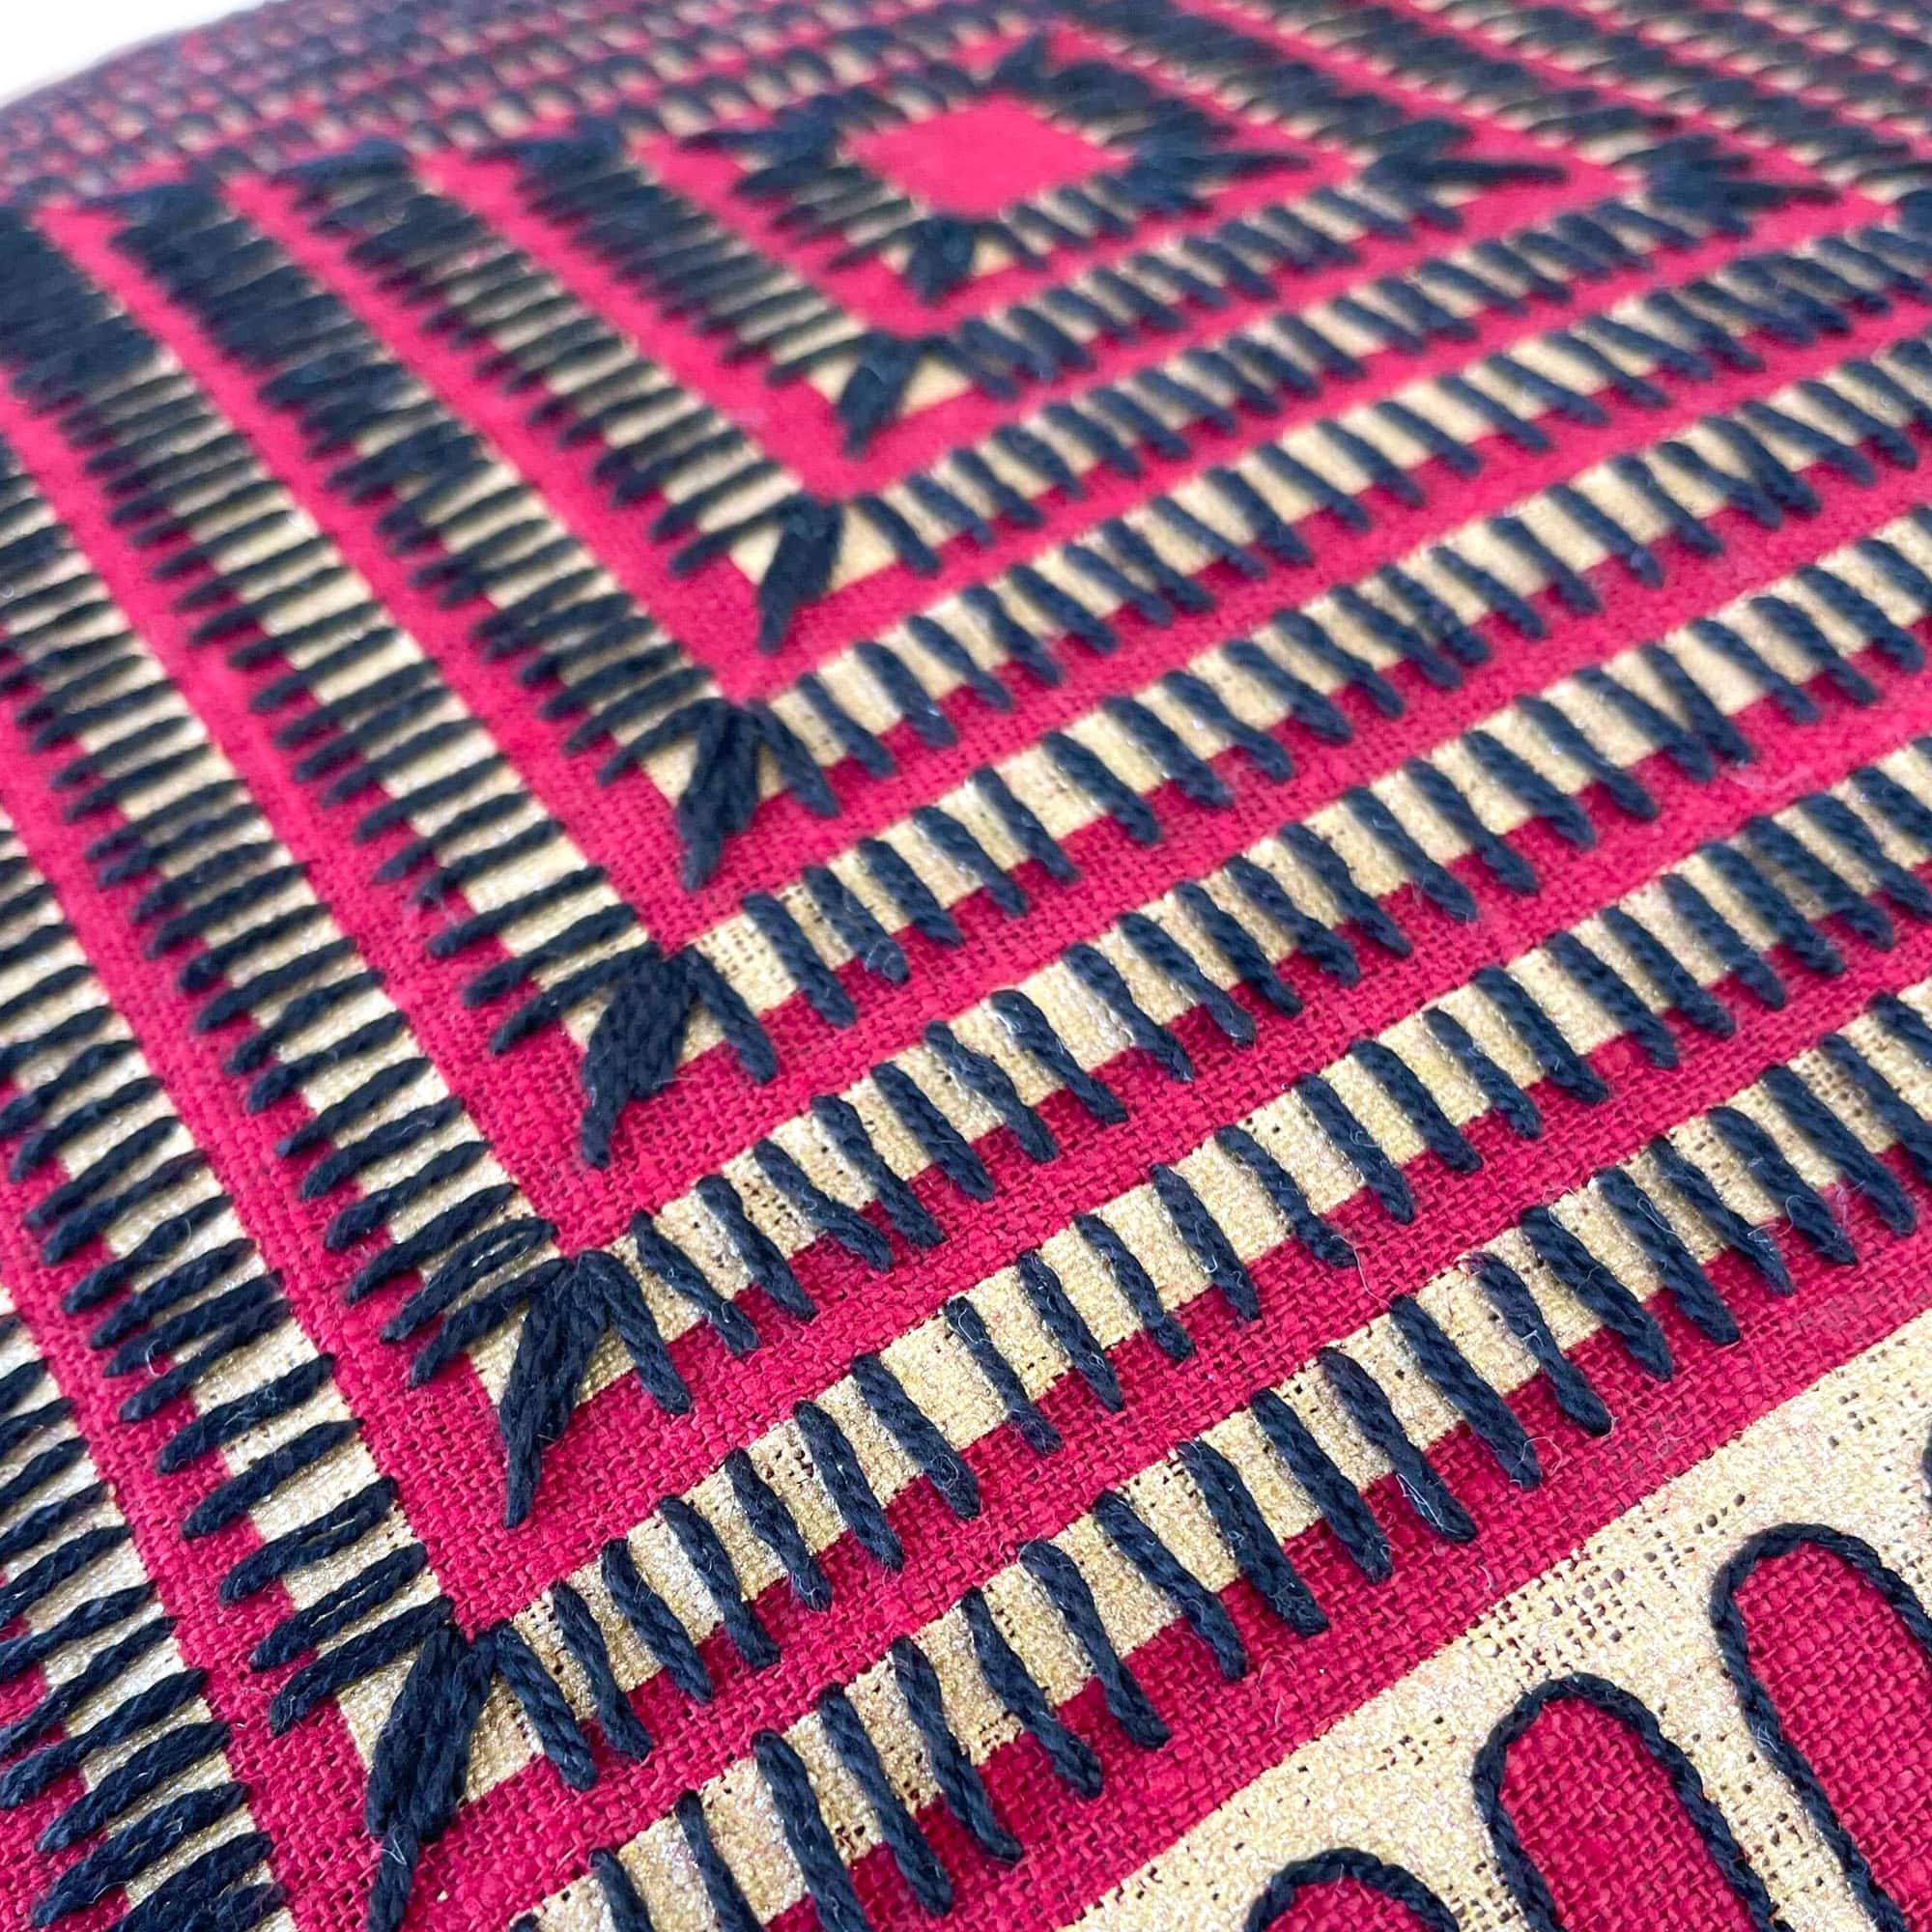 Fine-Cell-Work-Cressida-Bell-Collaboration-Red-Gold-Black-Linen-Pyramid-Cushion-Detail.jpg